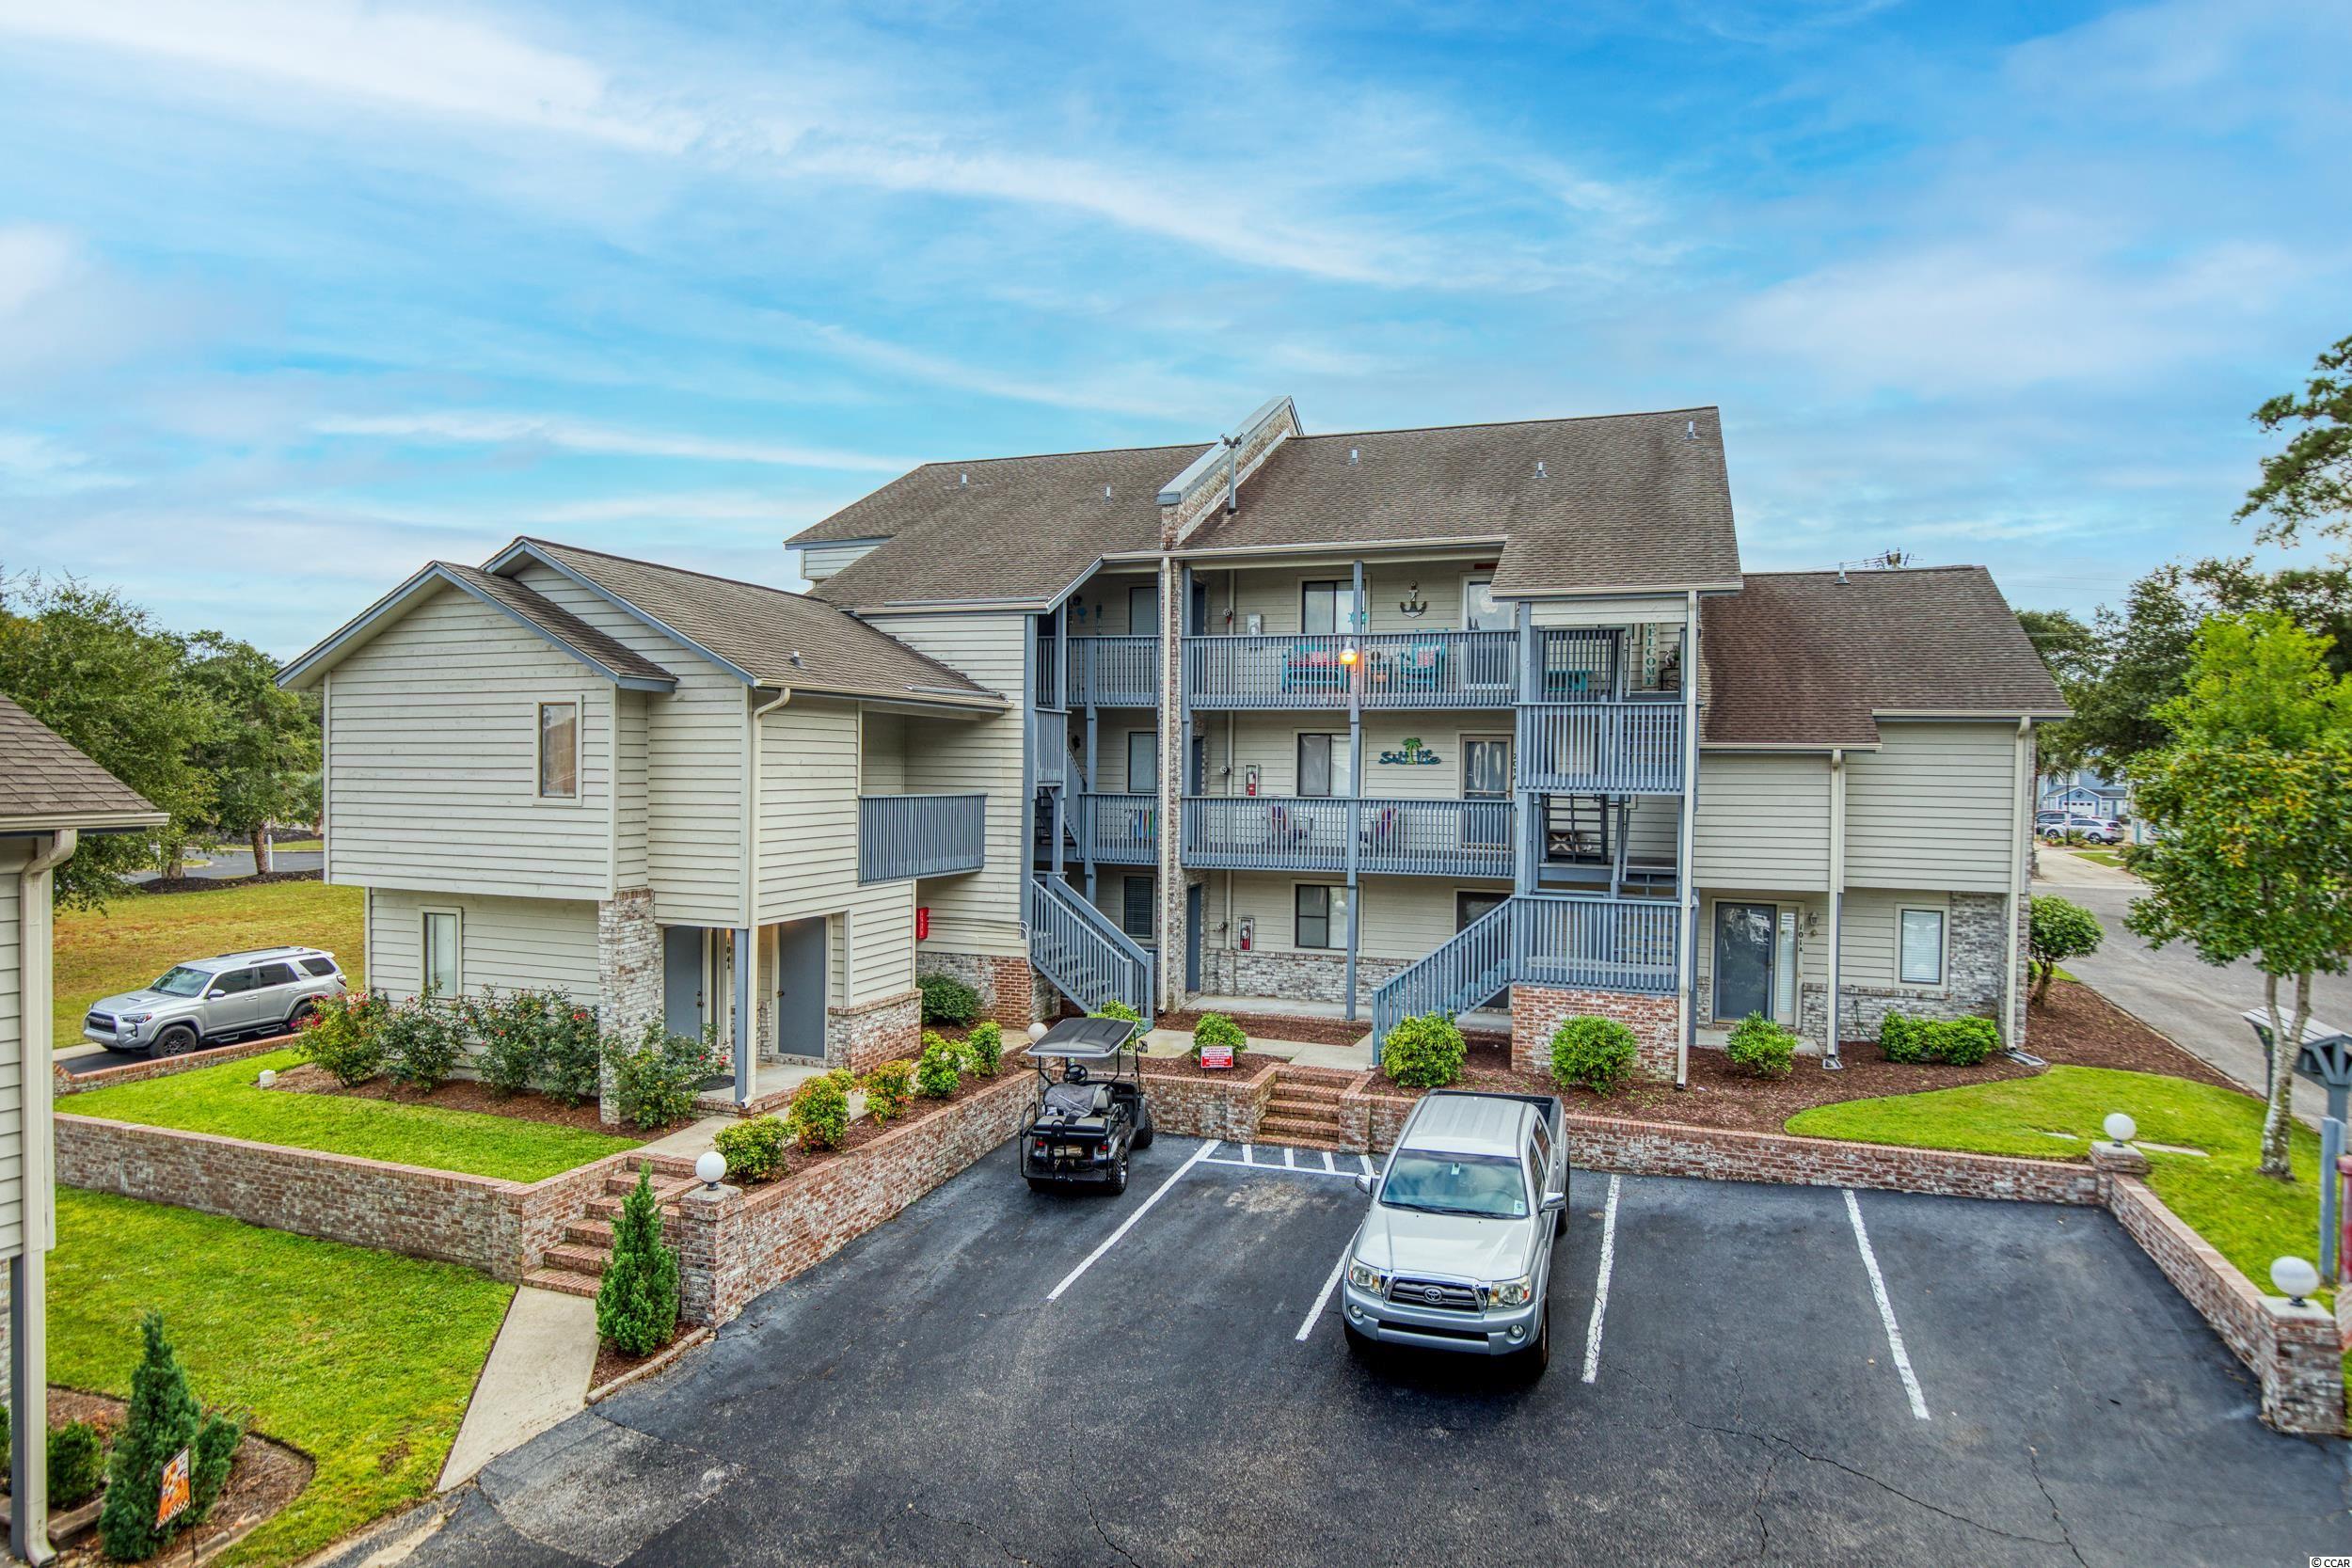 816 9th Ave. S UNIT 104-A North Myrtle Beach, SC 29582